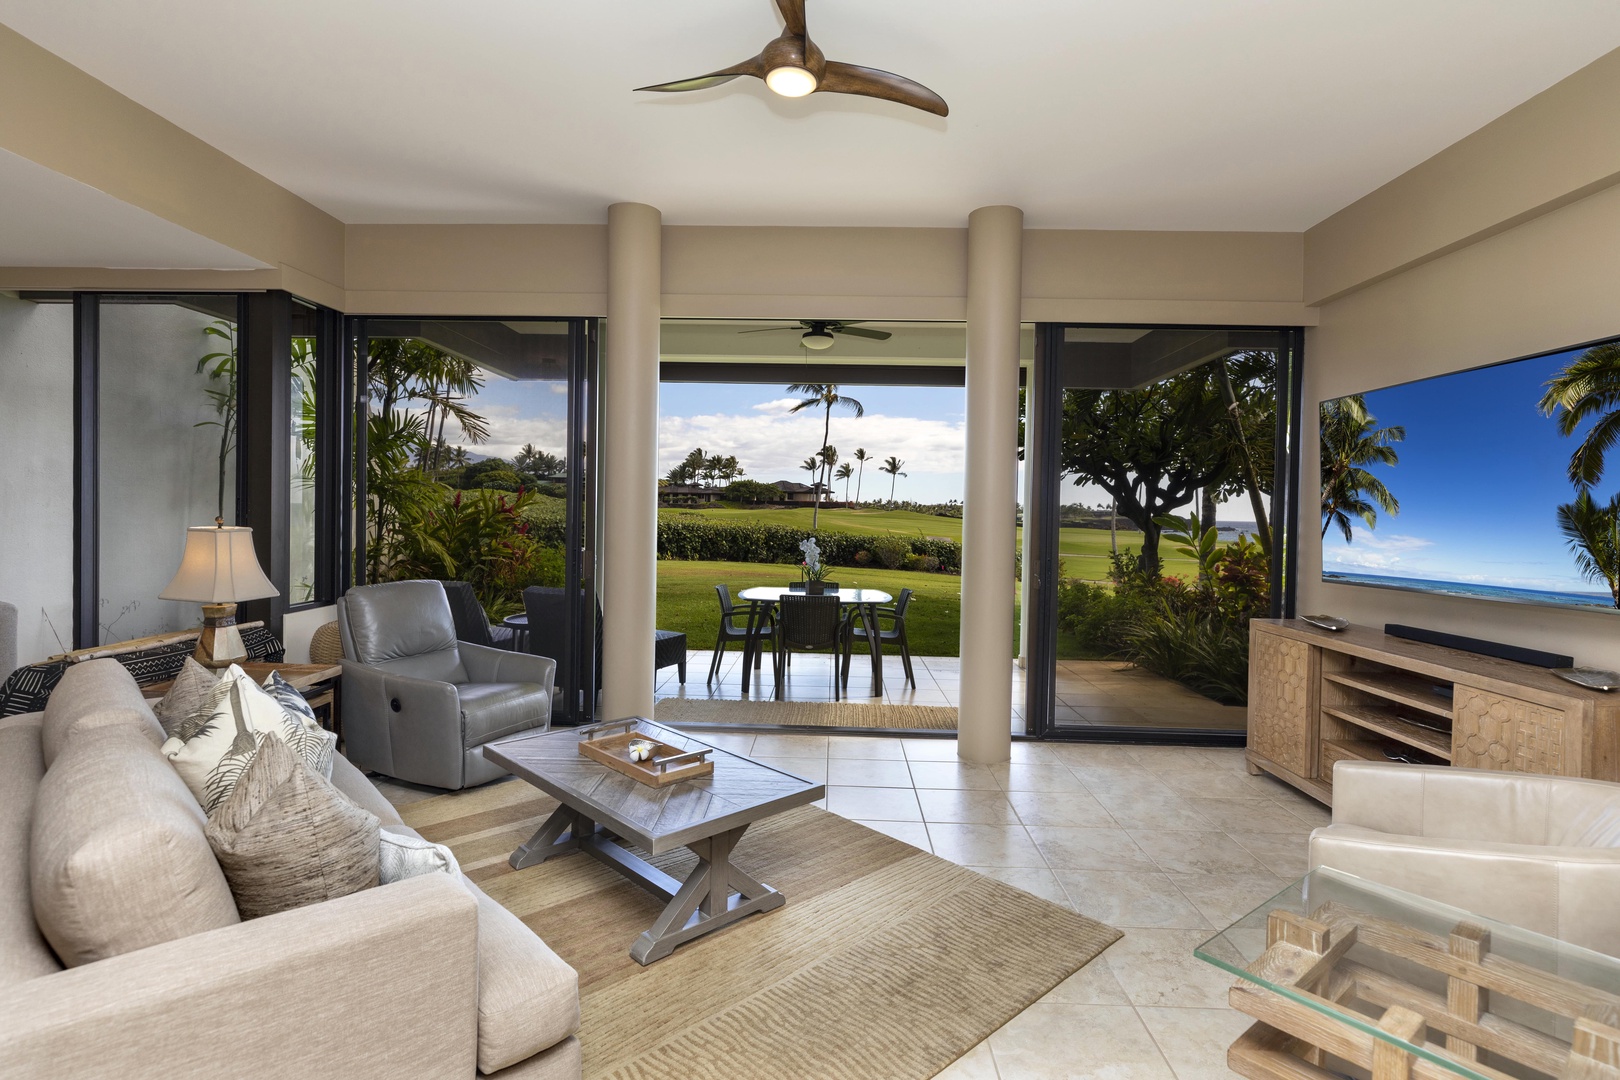 Kamuela Vacation Rentals, Mauna Lani Point E105 - Easy access to the lanai and beautiful views from the living room.